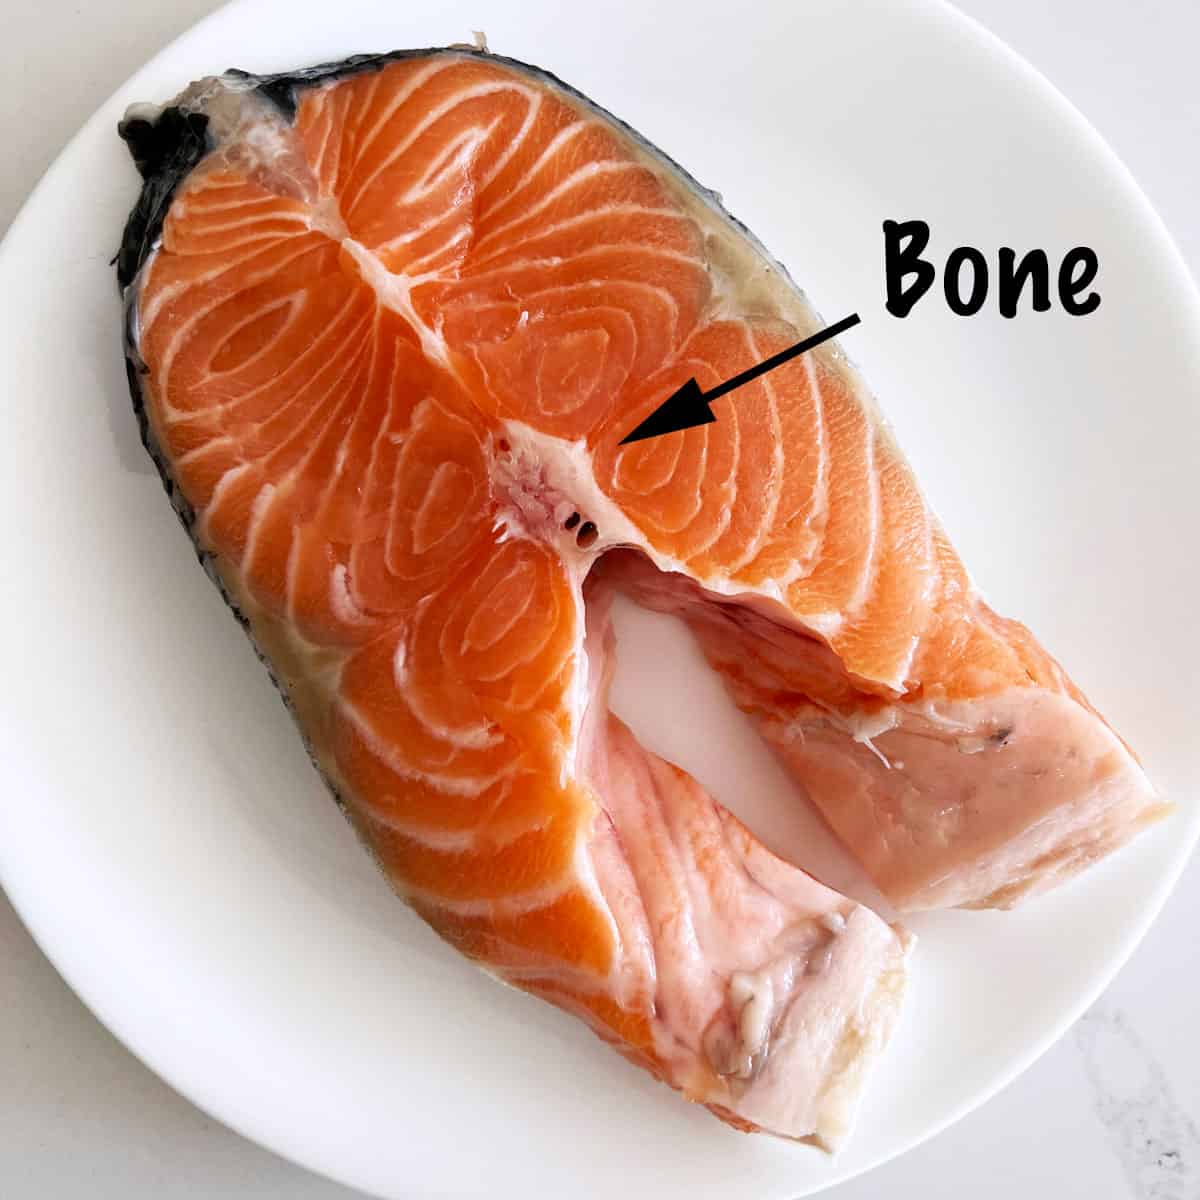 A raw salmon steak on a plate. An arrow and a text point out to where the bone is located.